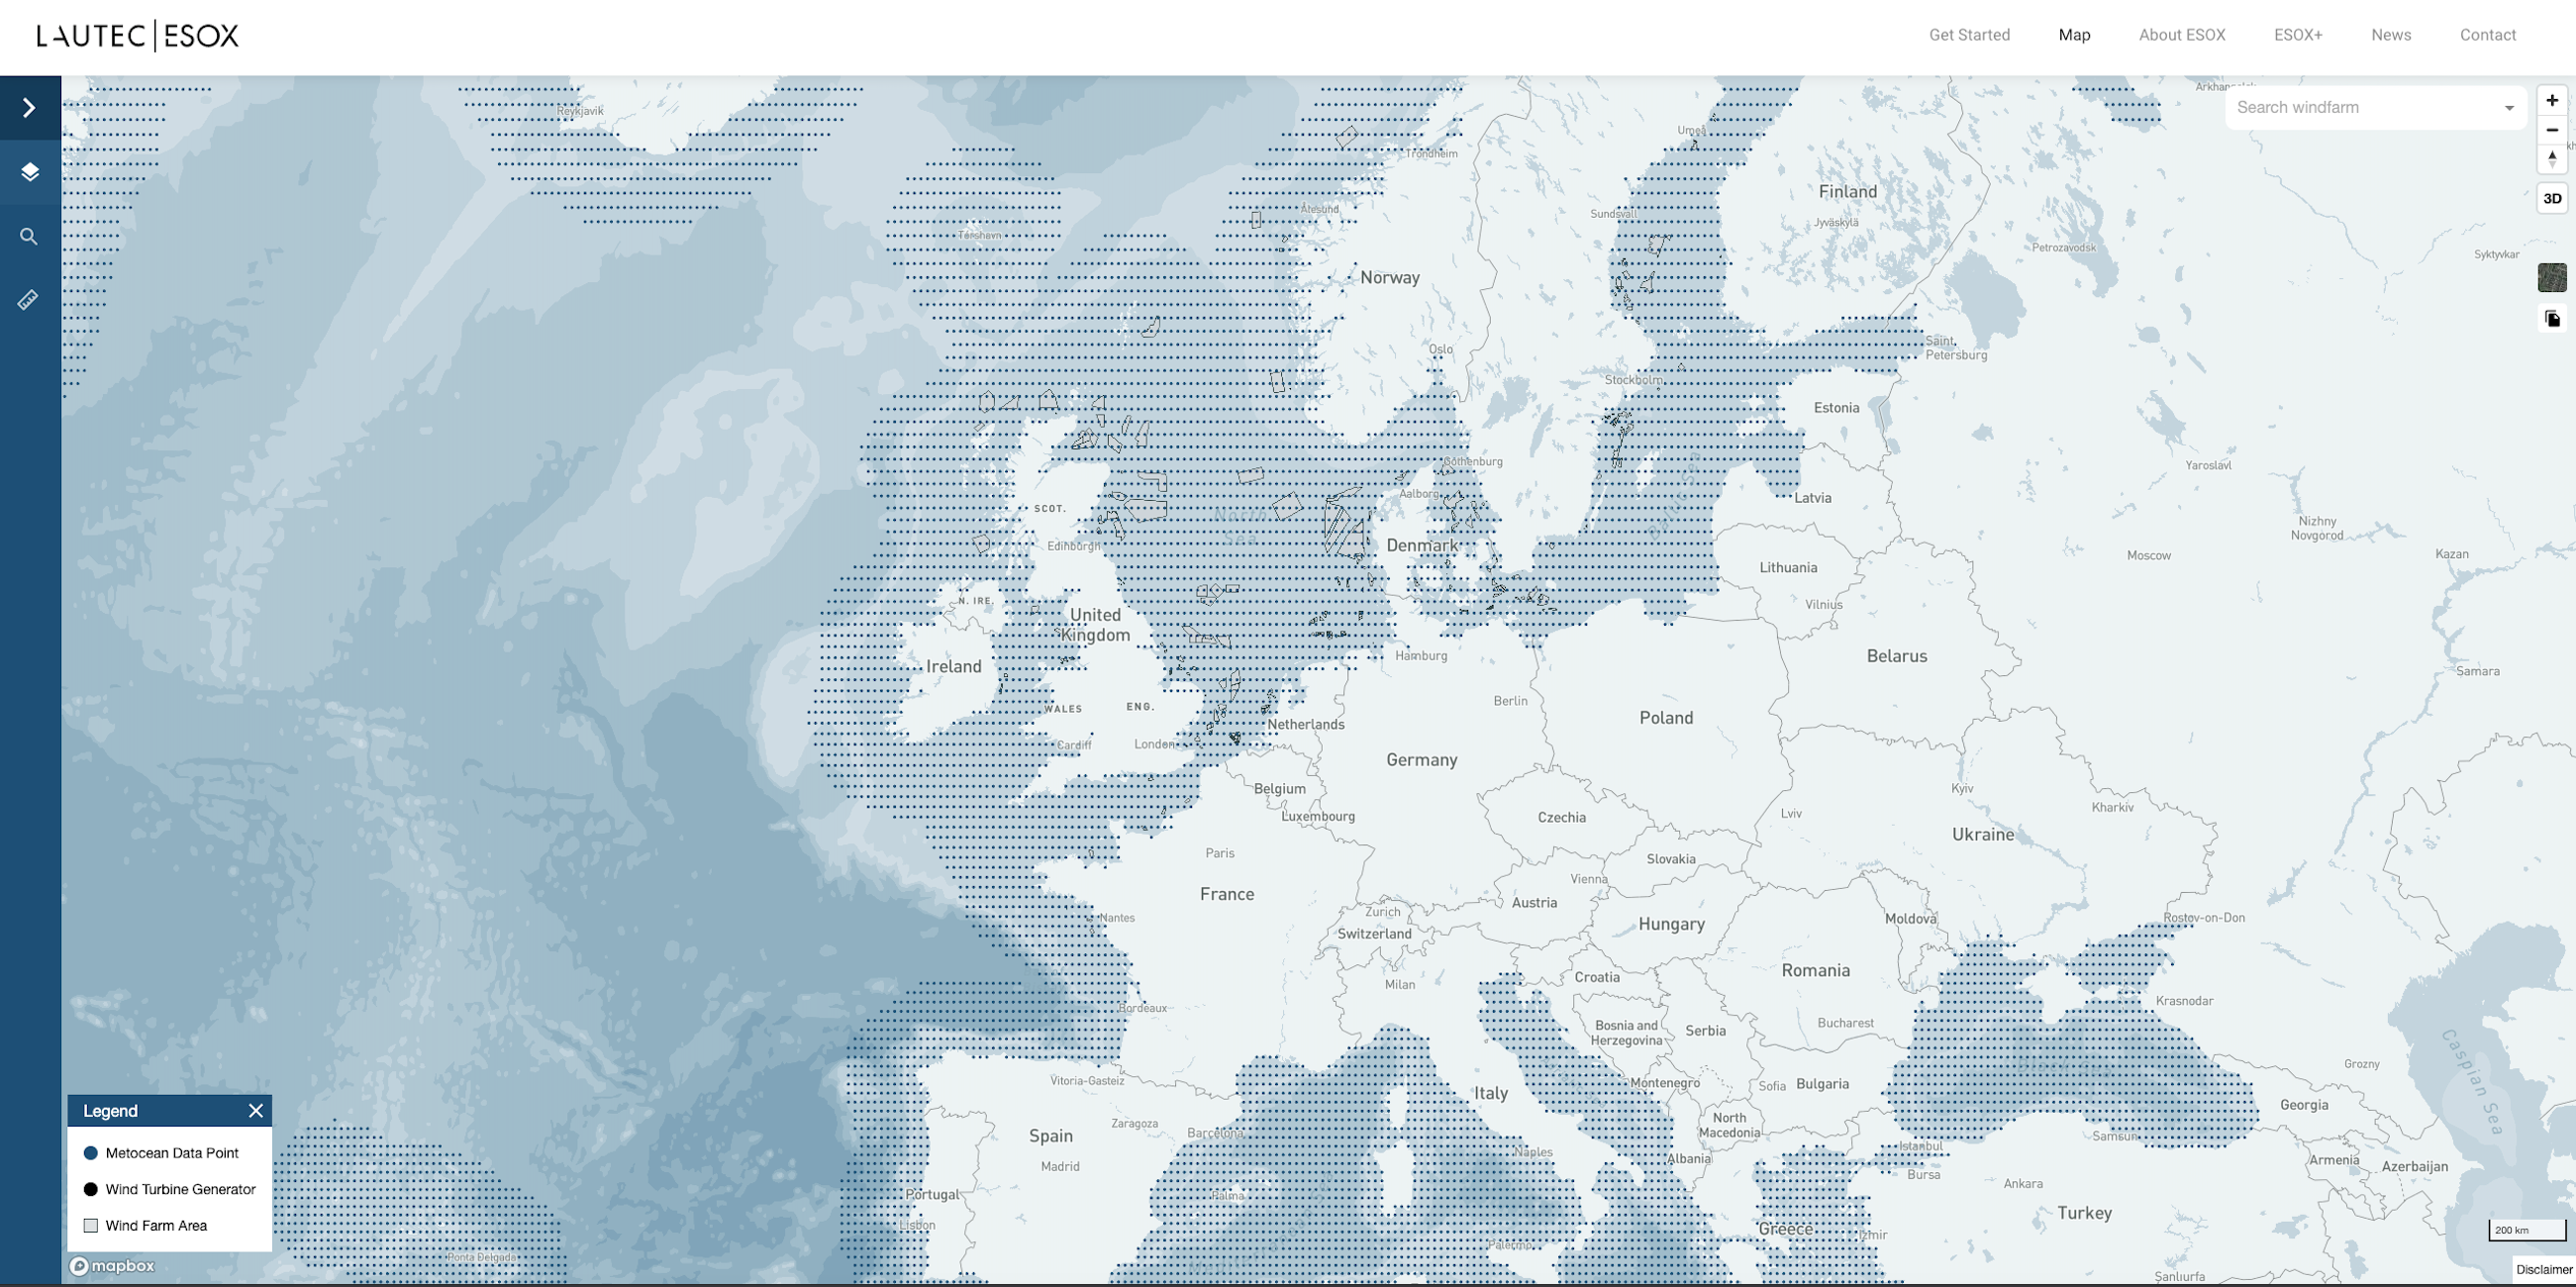 Try our free ESOX tool and get 30 years of global hindcast data